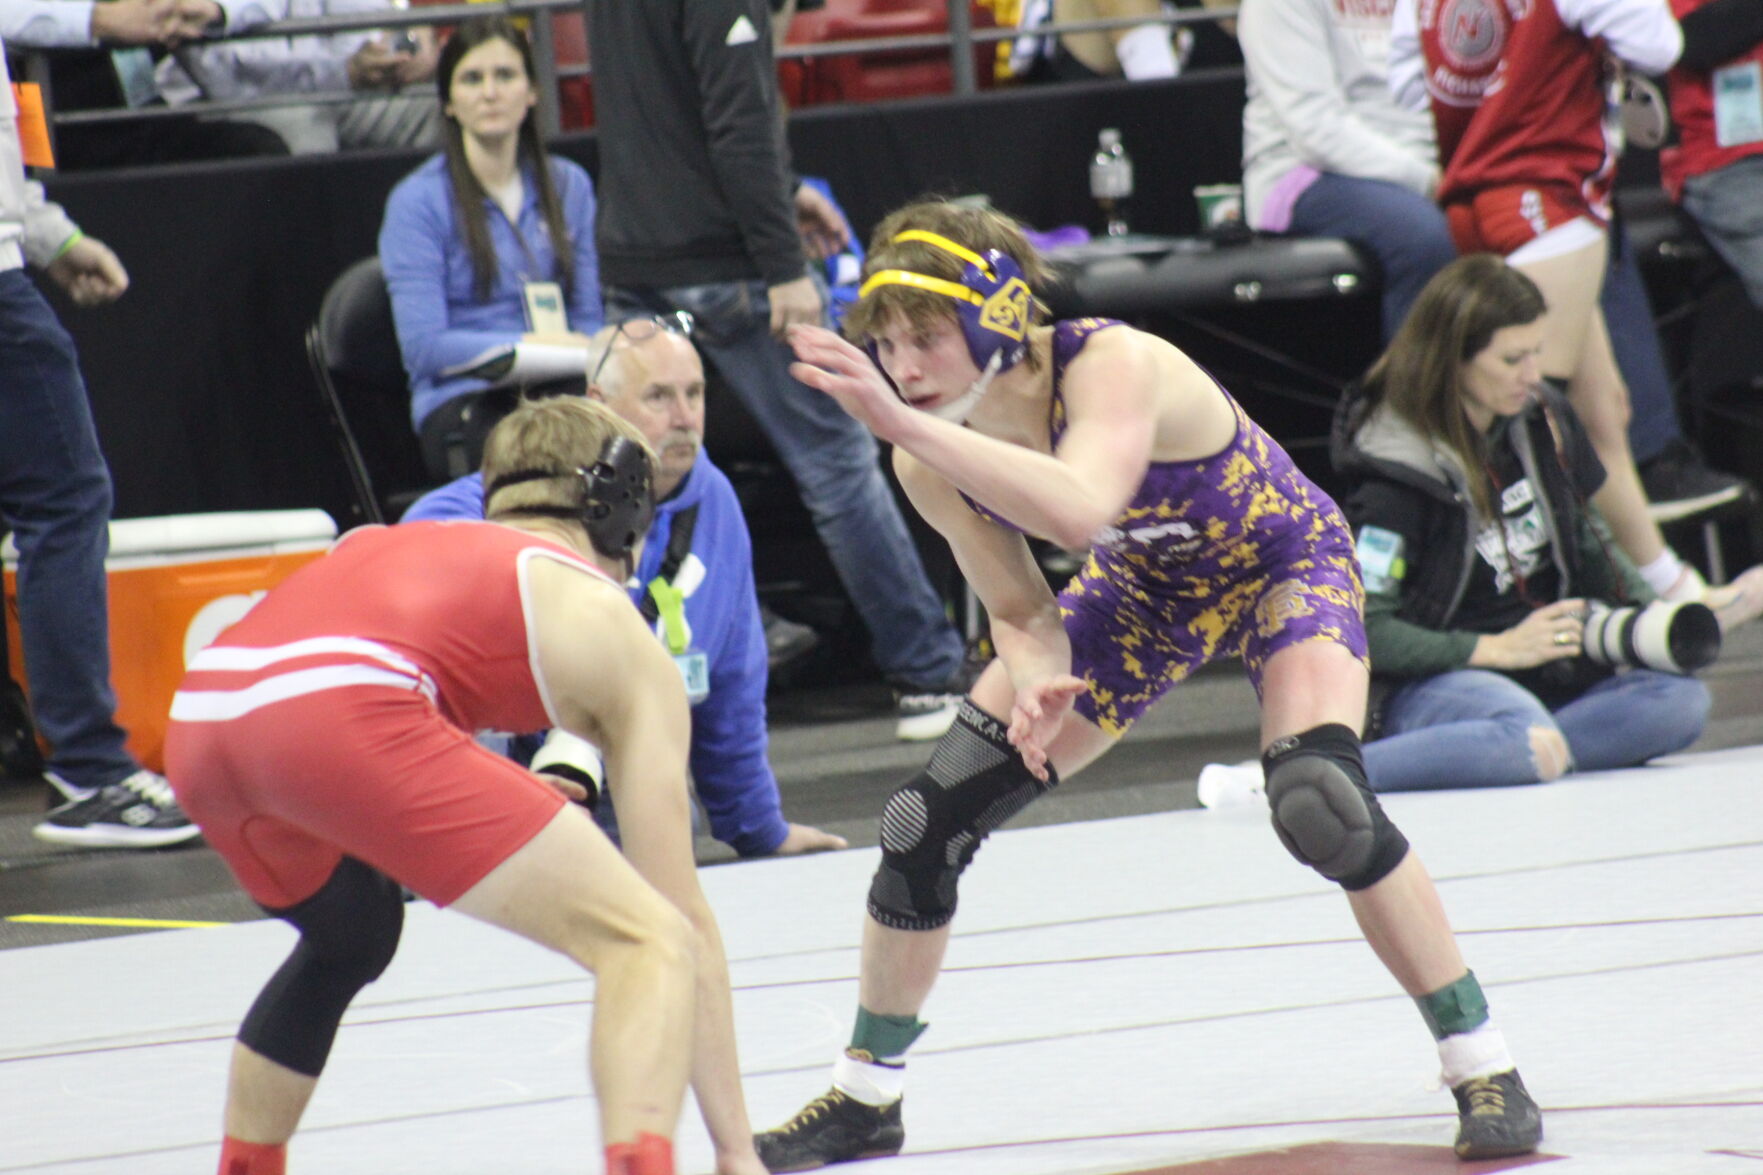 Mixed Results for Sheboygan Wrestlers on Day 1 of WIAA State Championships in Madison